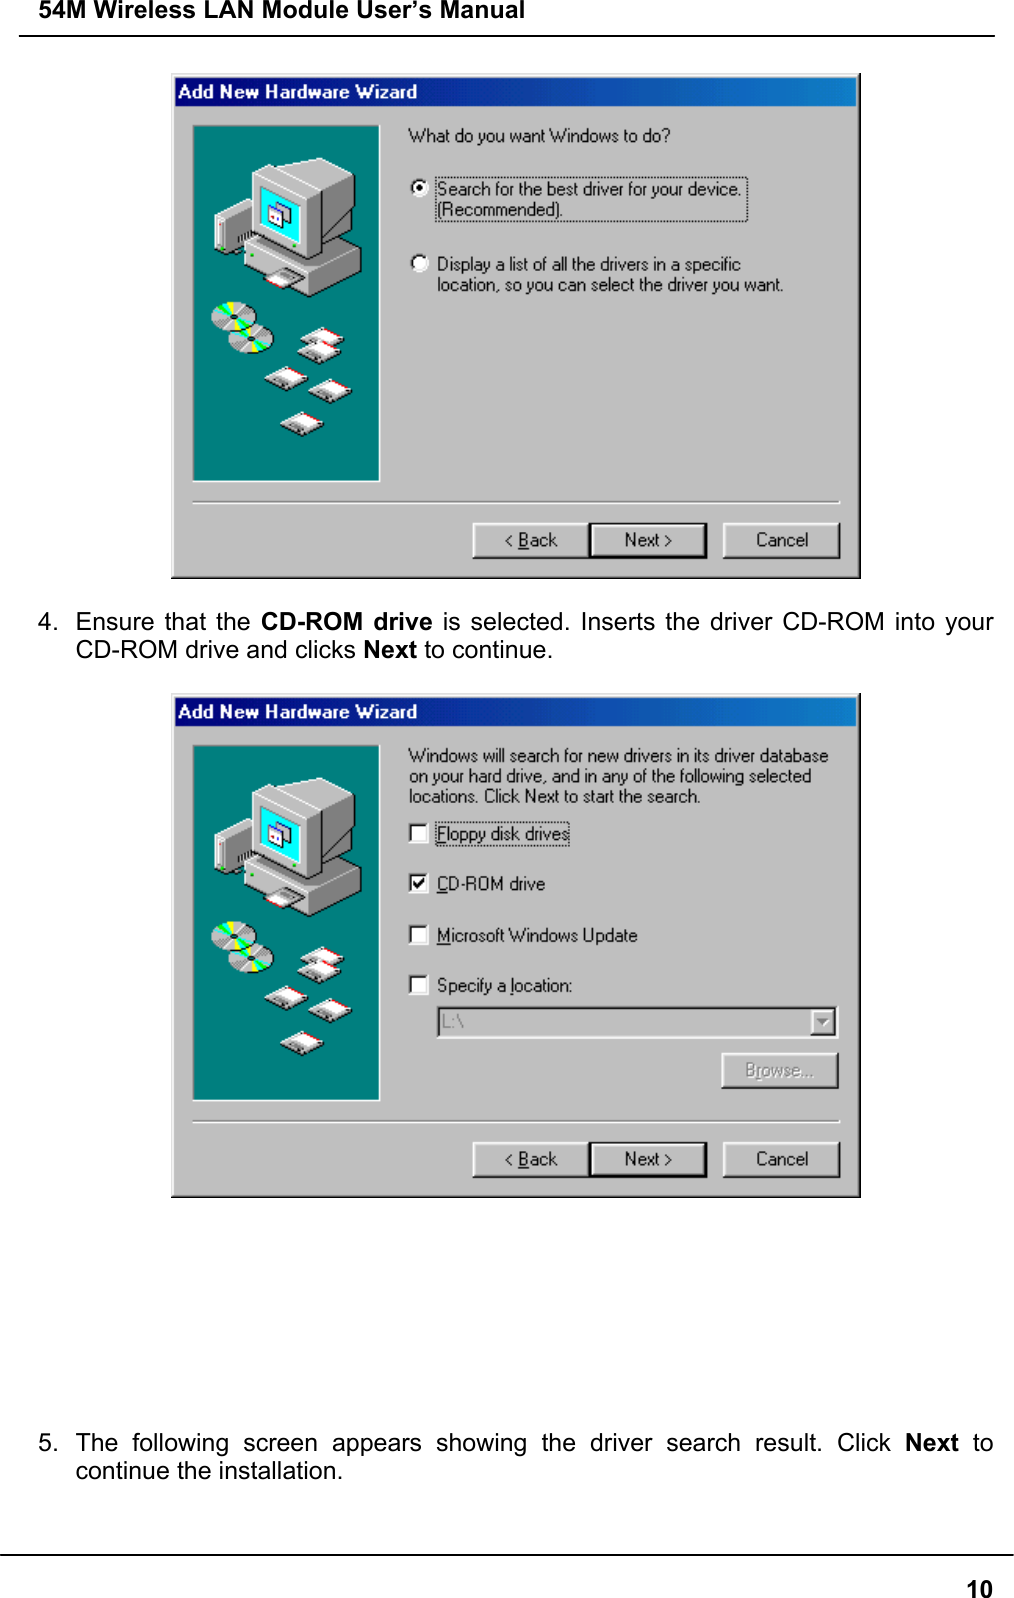 54M Wireless LAN Module User’s Manual104. Ensure that the CD-ROM drive is selected. Inserts the driver CD-ROM into yourCD-ROM drive and clicks Next to continue.5. The following screen appears showing the driver search result. Click Next tocontinue the installation.